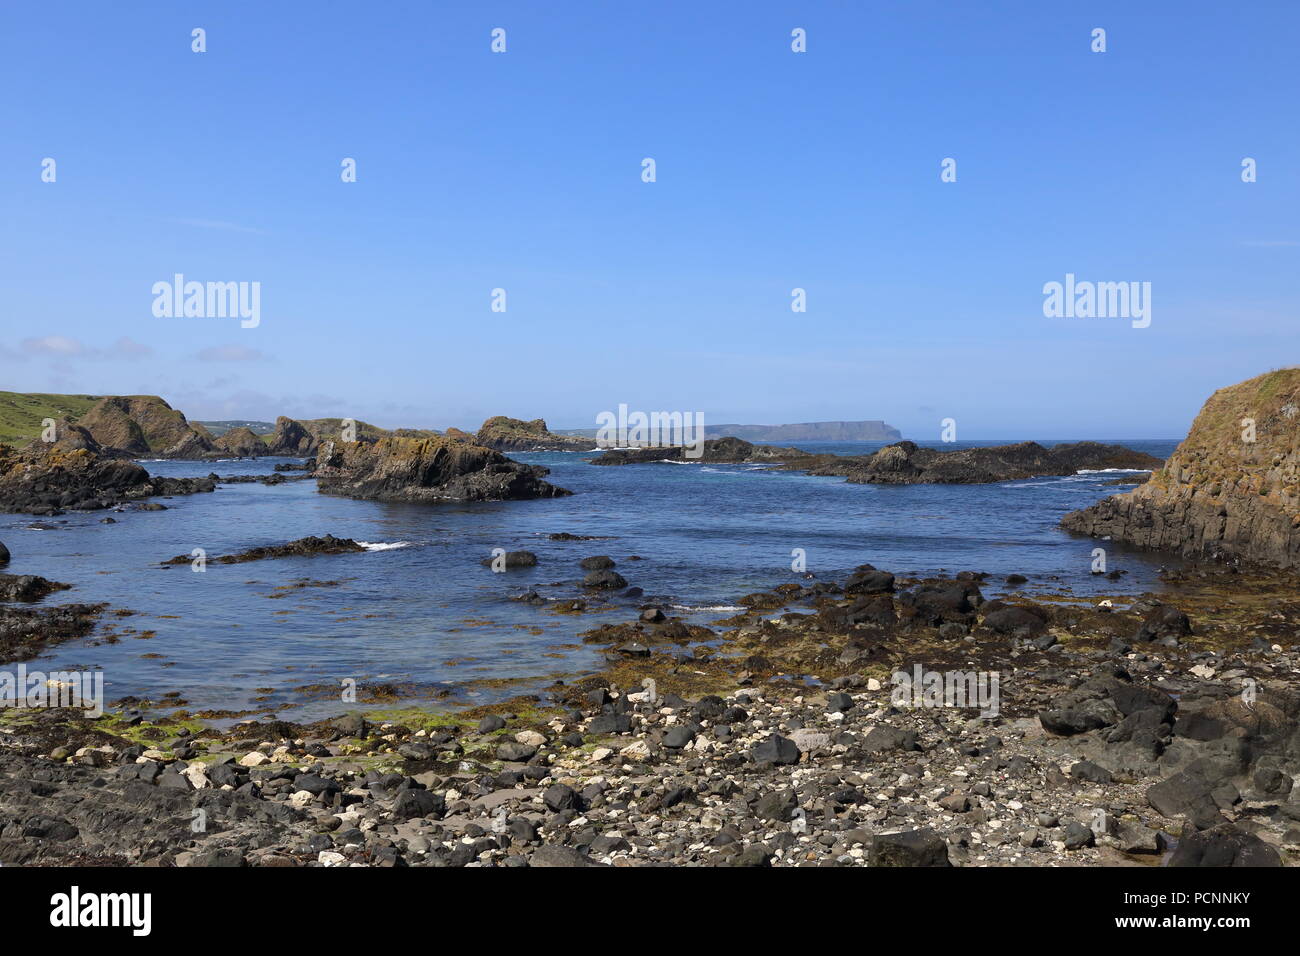 Small islets or skerries exposed by low tide at Ballintoy on the Causeway coast of Northern Ireland. Causeway head faintly visible in the distance. Stock Photo